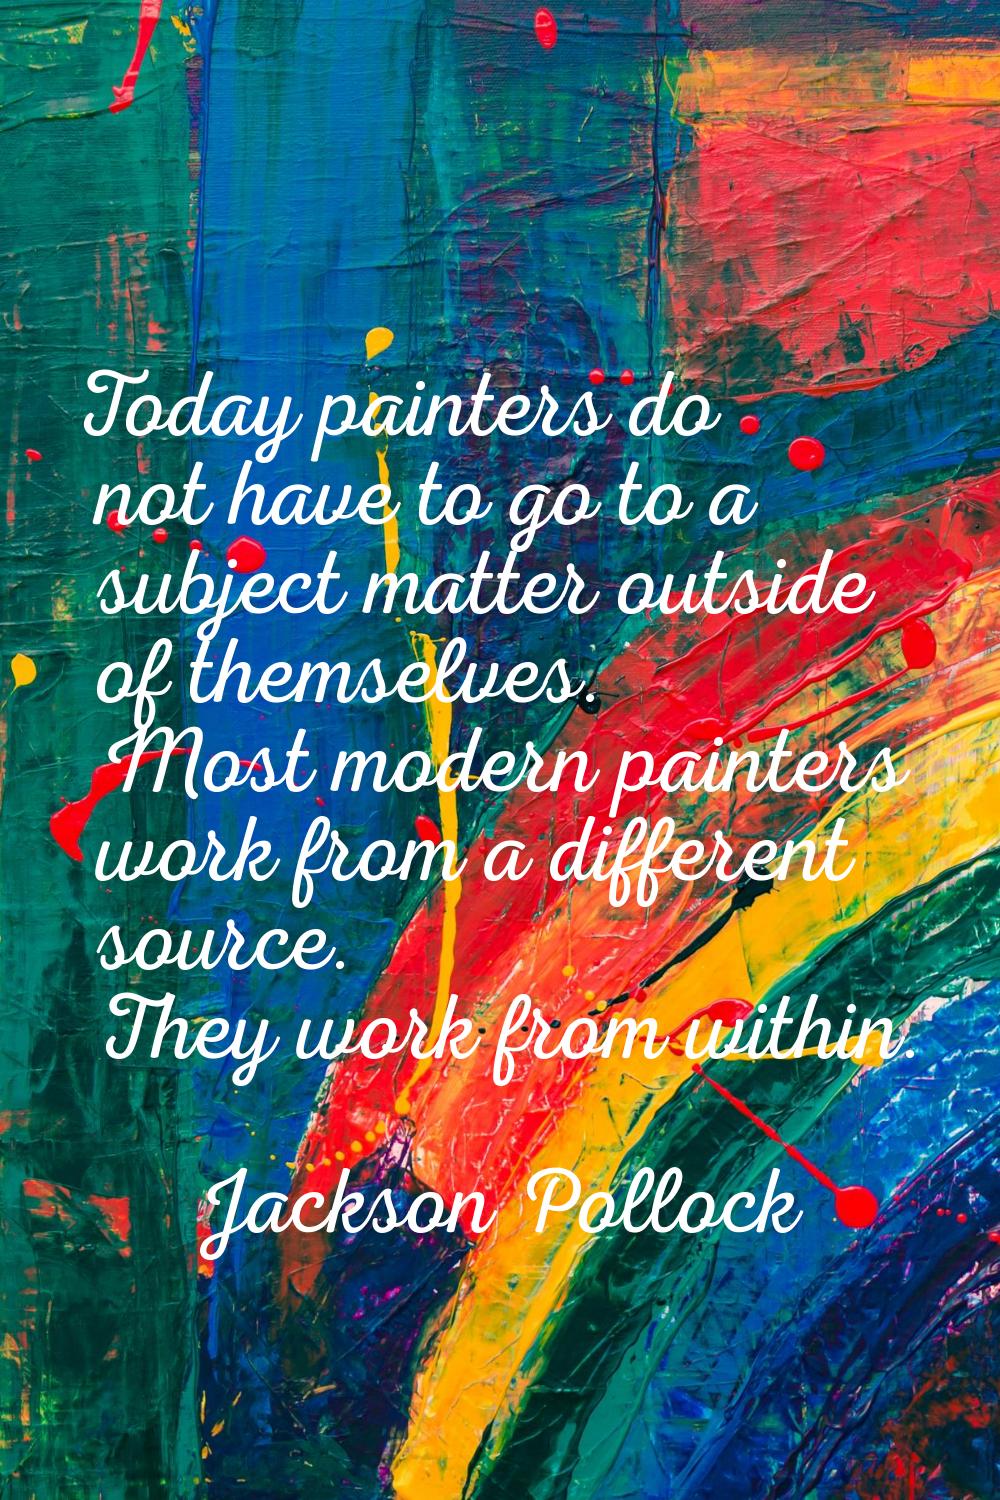 Today painters do not have to go to a subject matter outside of themselves. Most modern painters wo